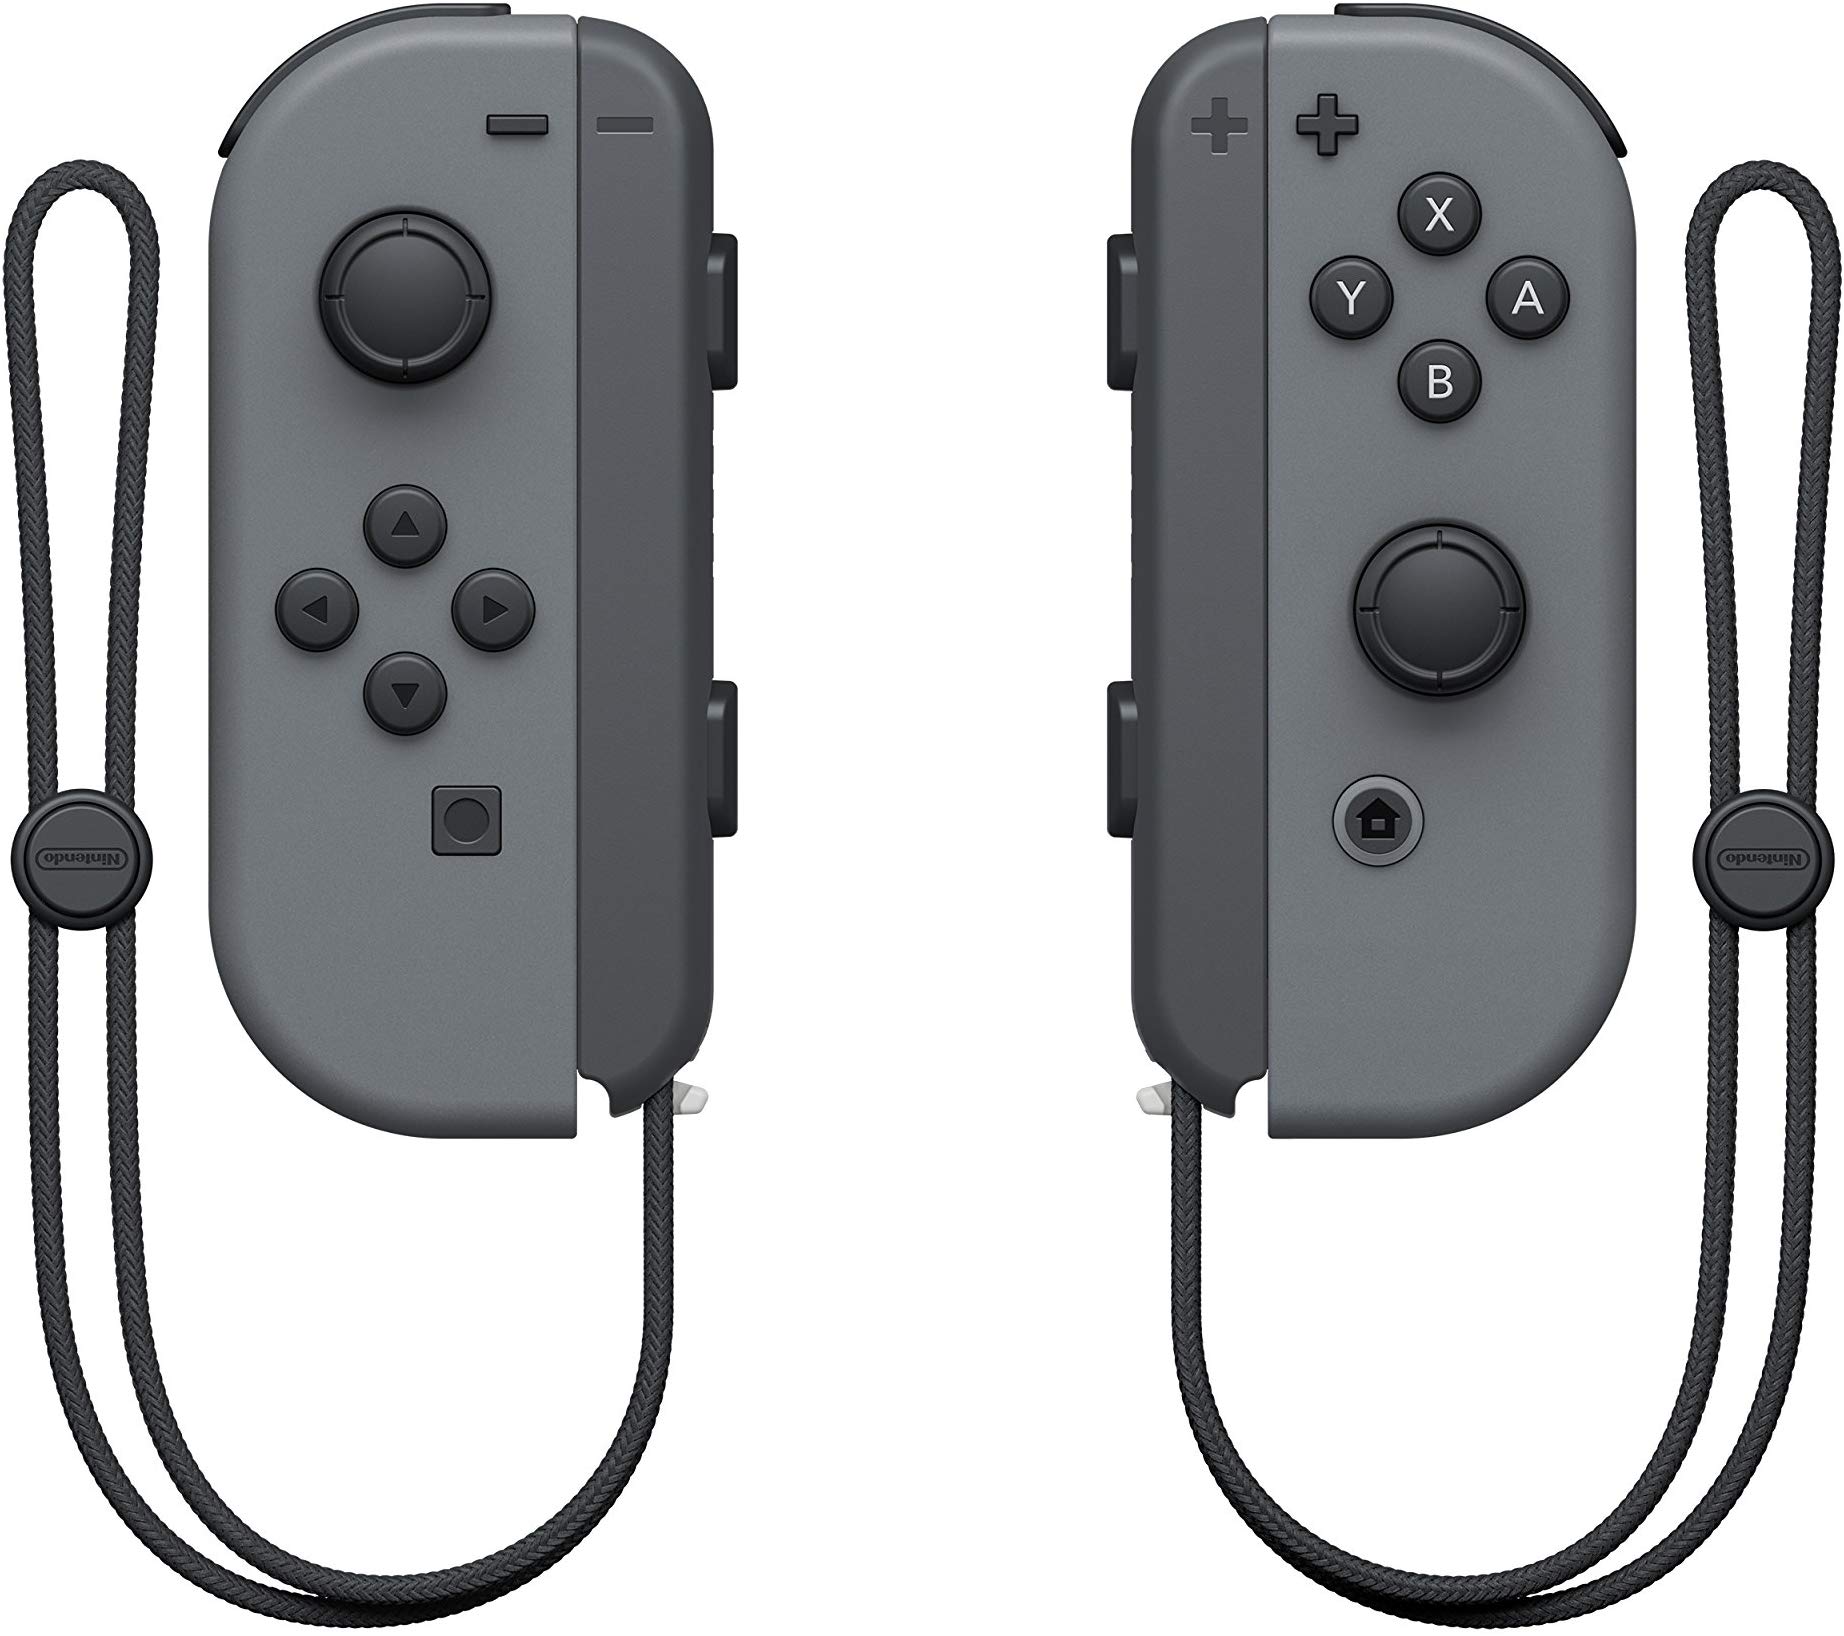 Joy-Cons vs. NES Controllers: Which should you use with NES Nintendo